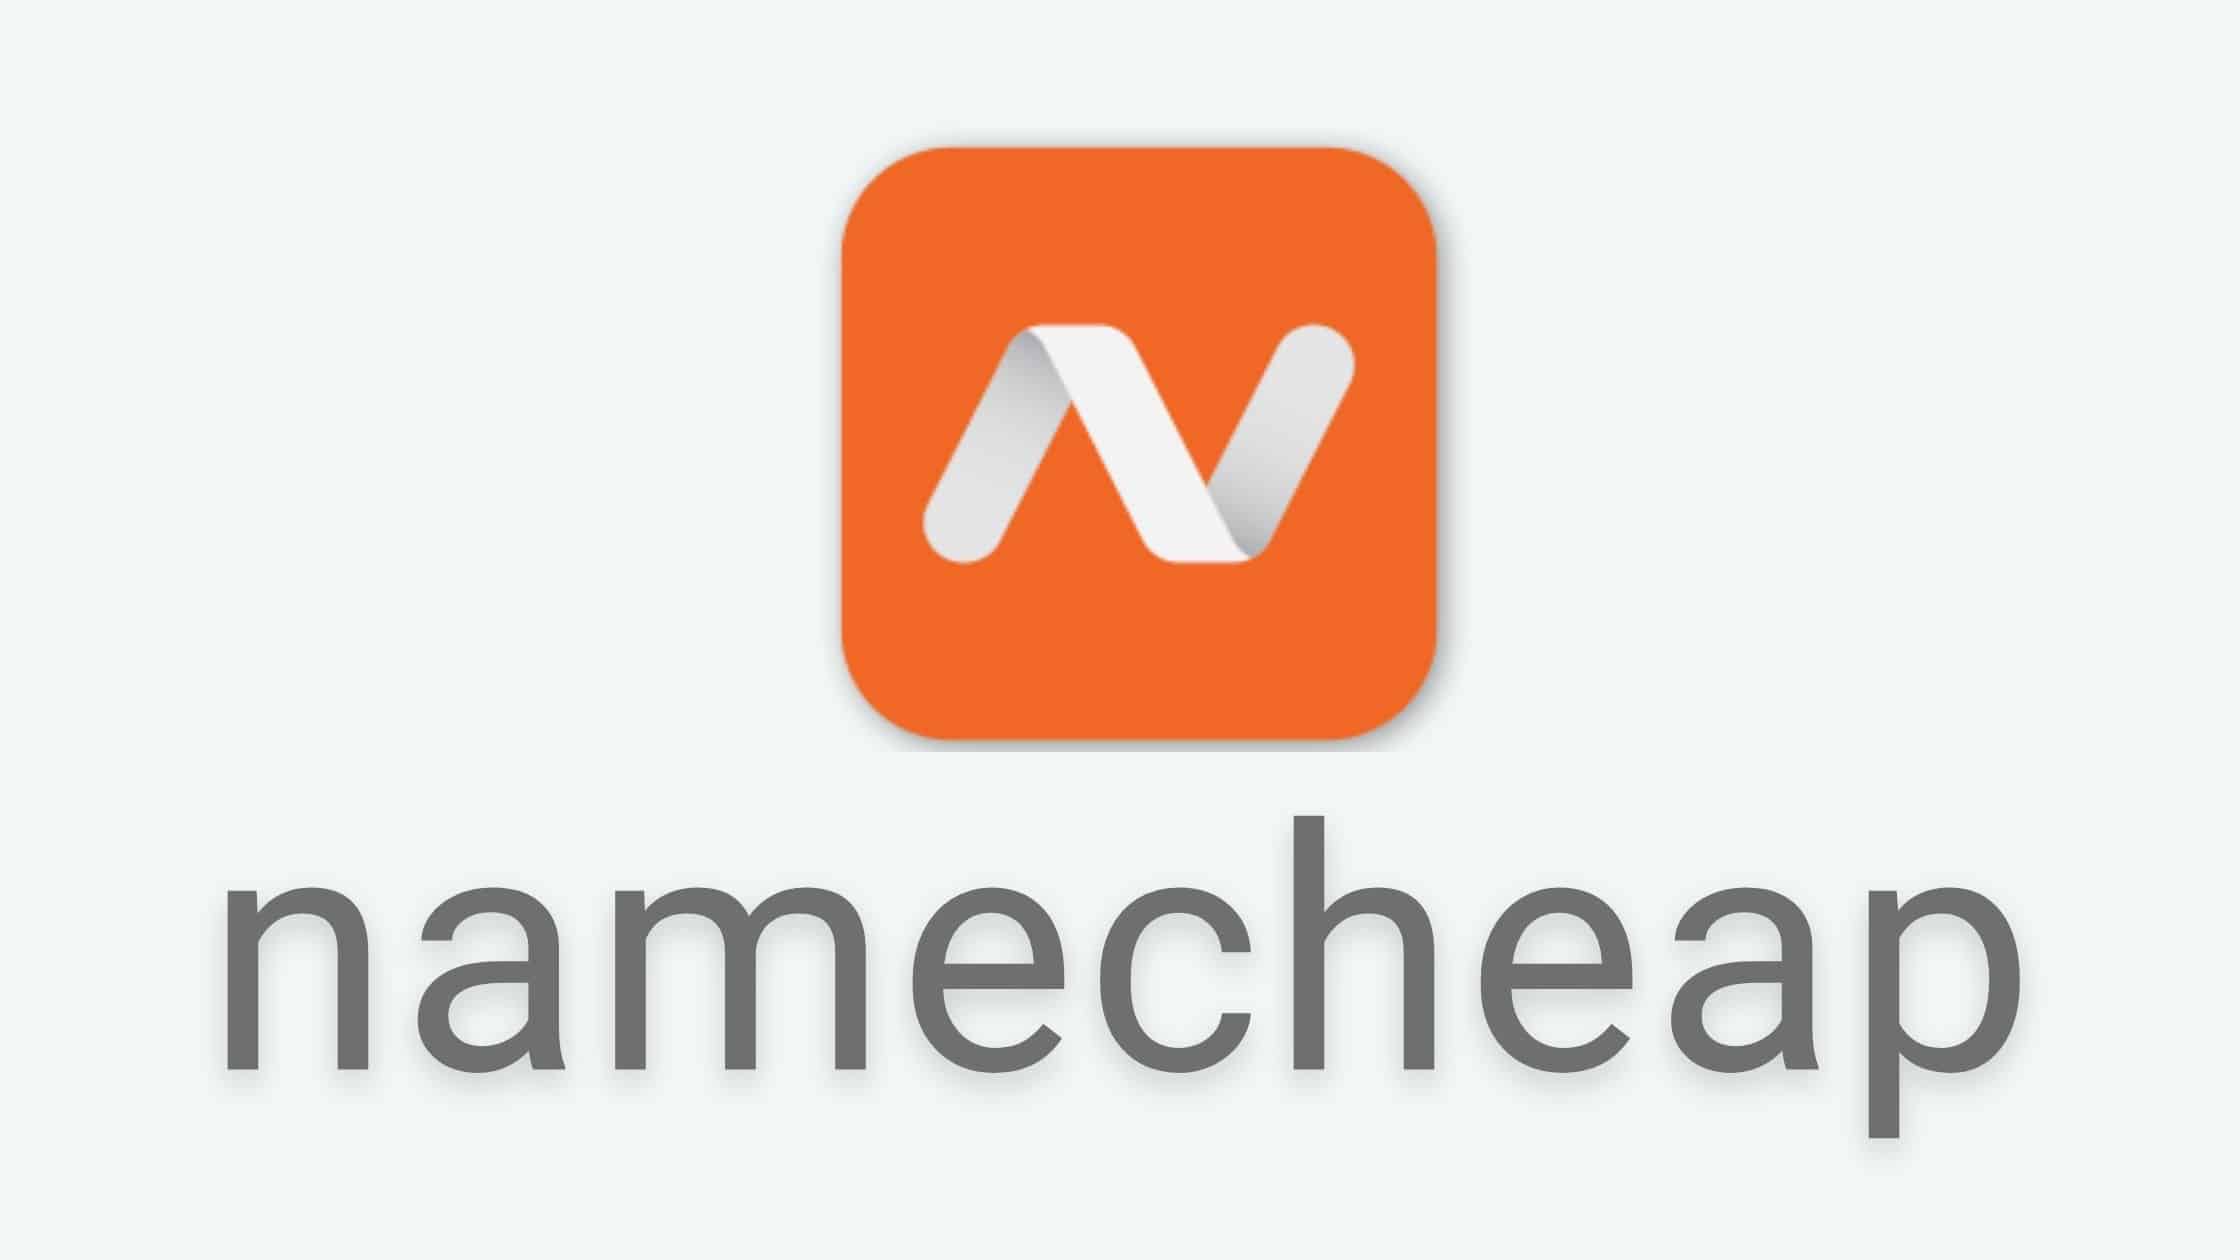 Namecheap: How to Protect Your Domain Name with Security